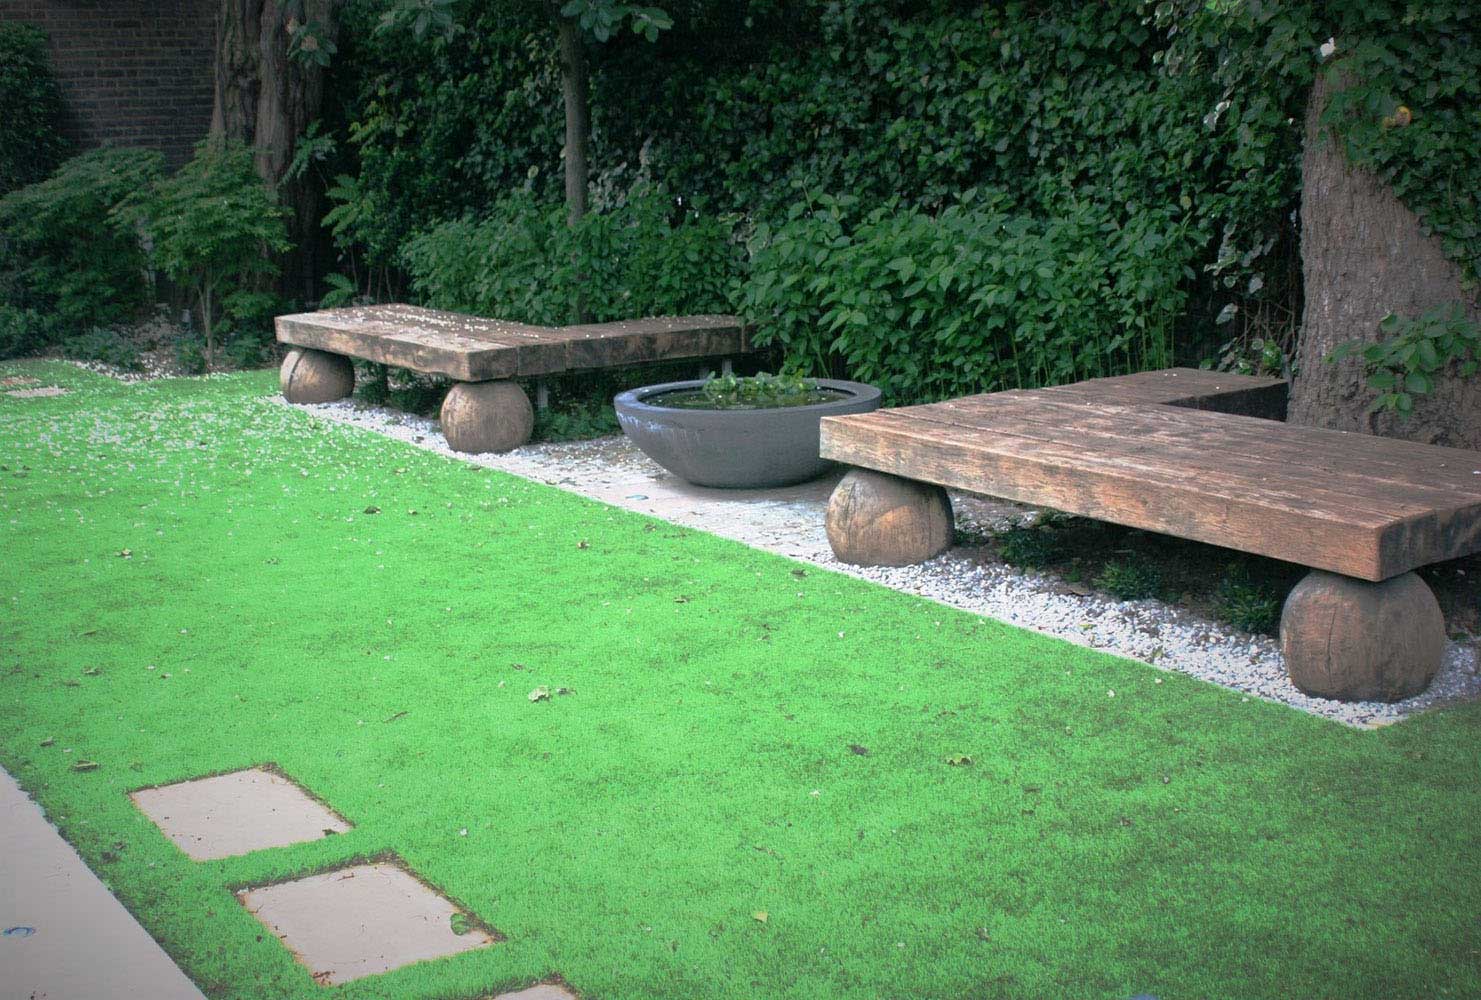 City Retreat Garden London. Bespoke sculptural seating and planter next to lawn. Rae Wilkinson Garden and Landscape Design Surrey, Sussex, Hampshire, London, South-East England